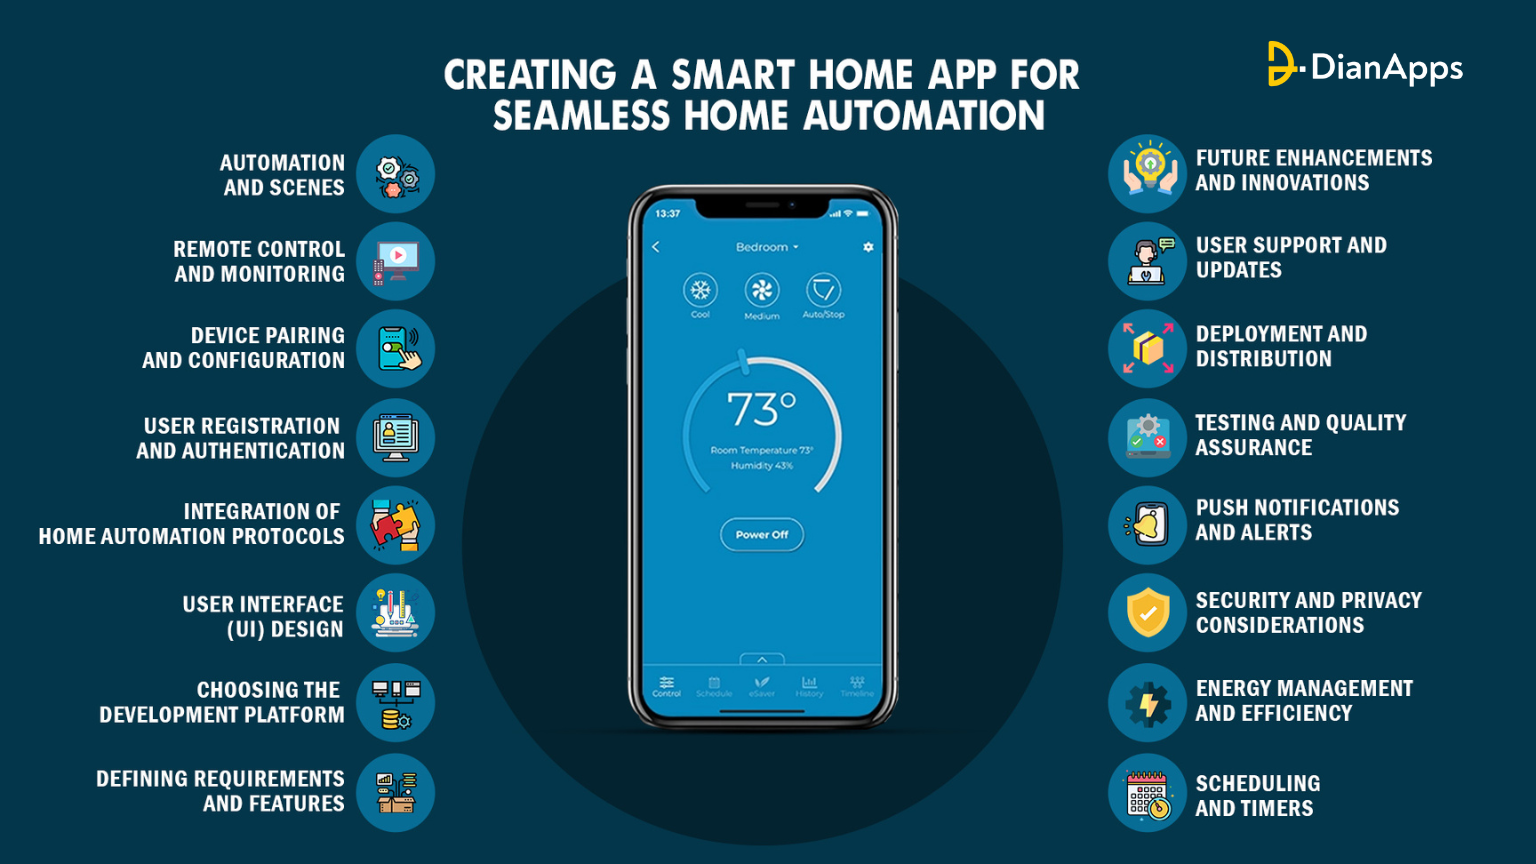 Creating a Smart Home App for Seamless Home Automation